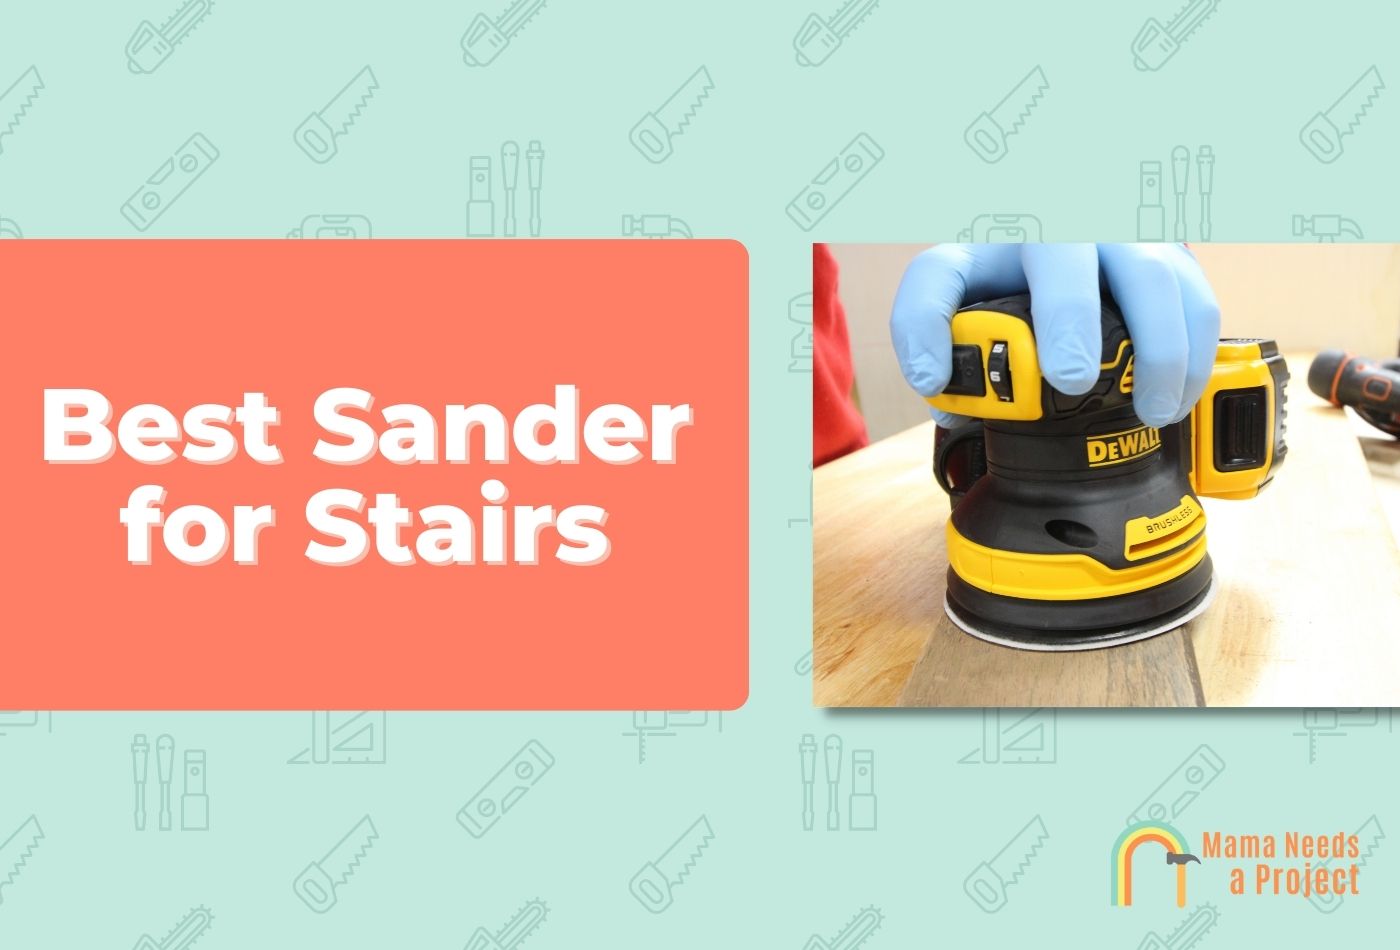 Best Sander for Stairs